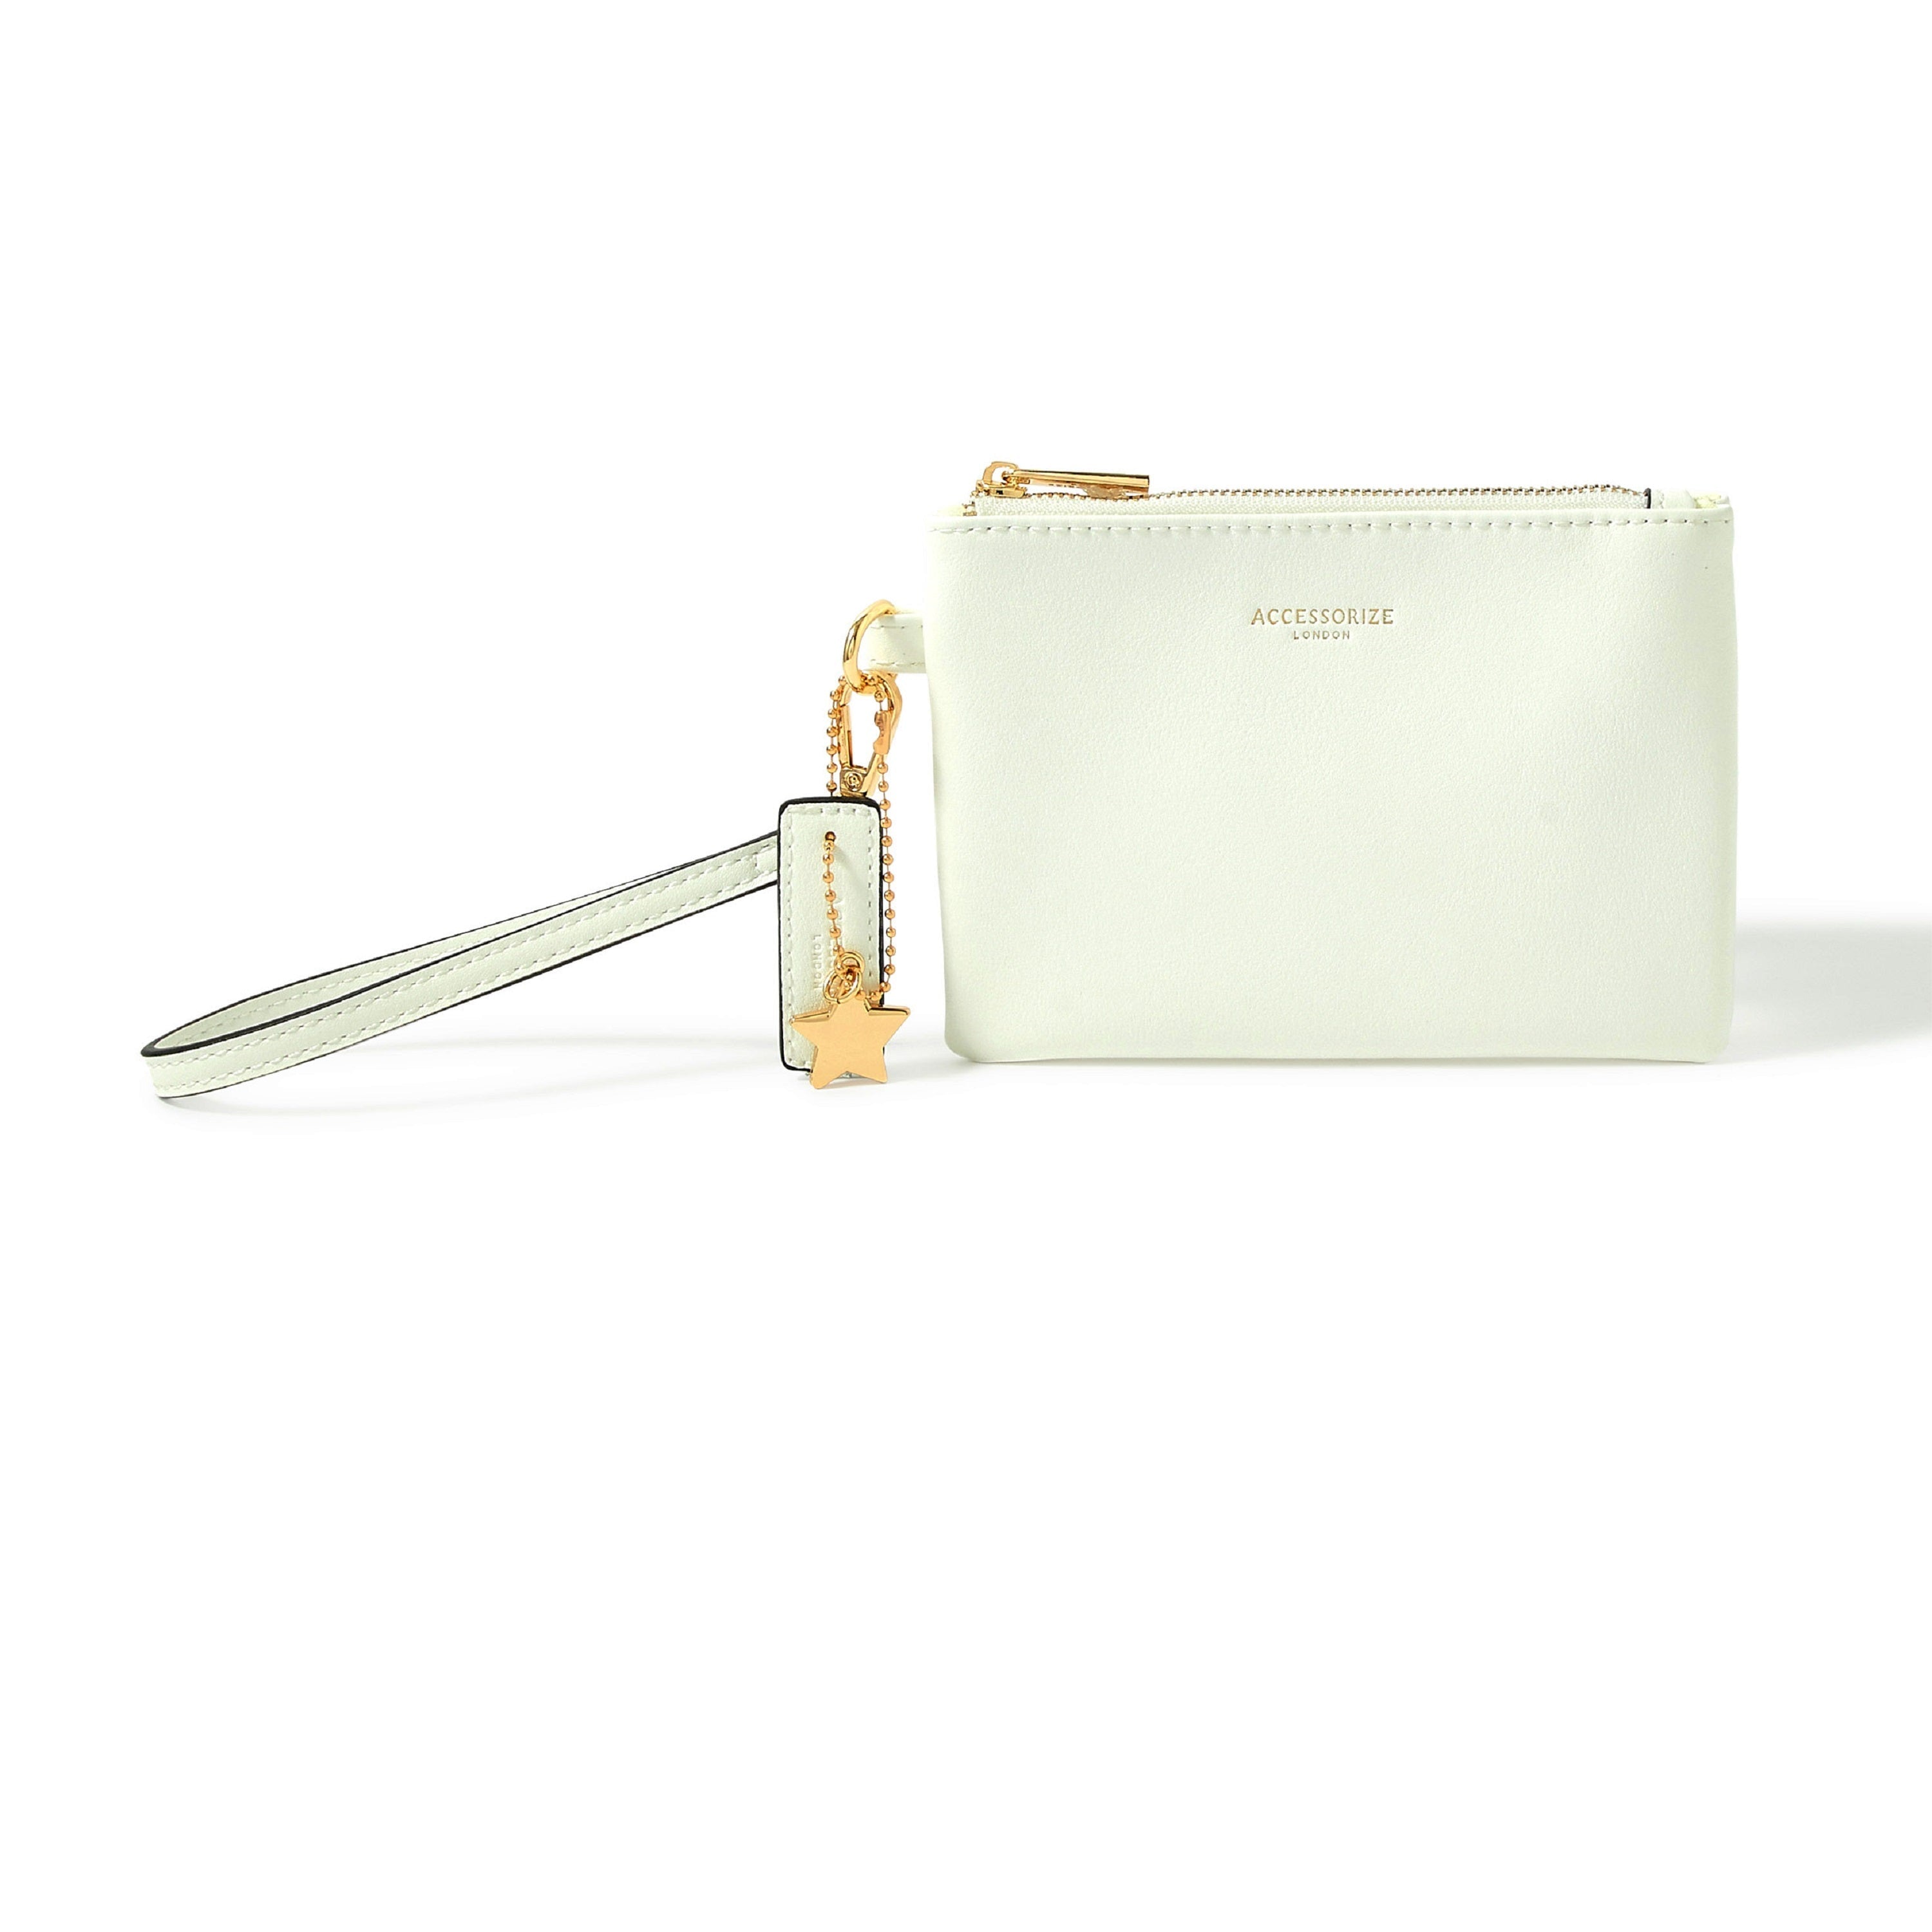 Buy White Charm Wristlet Wallet Online - Accessorize India